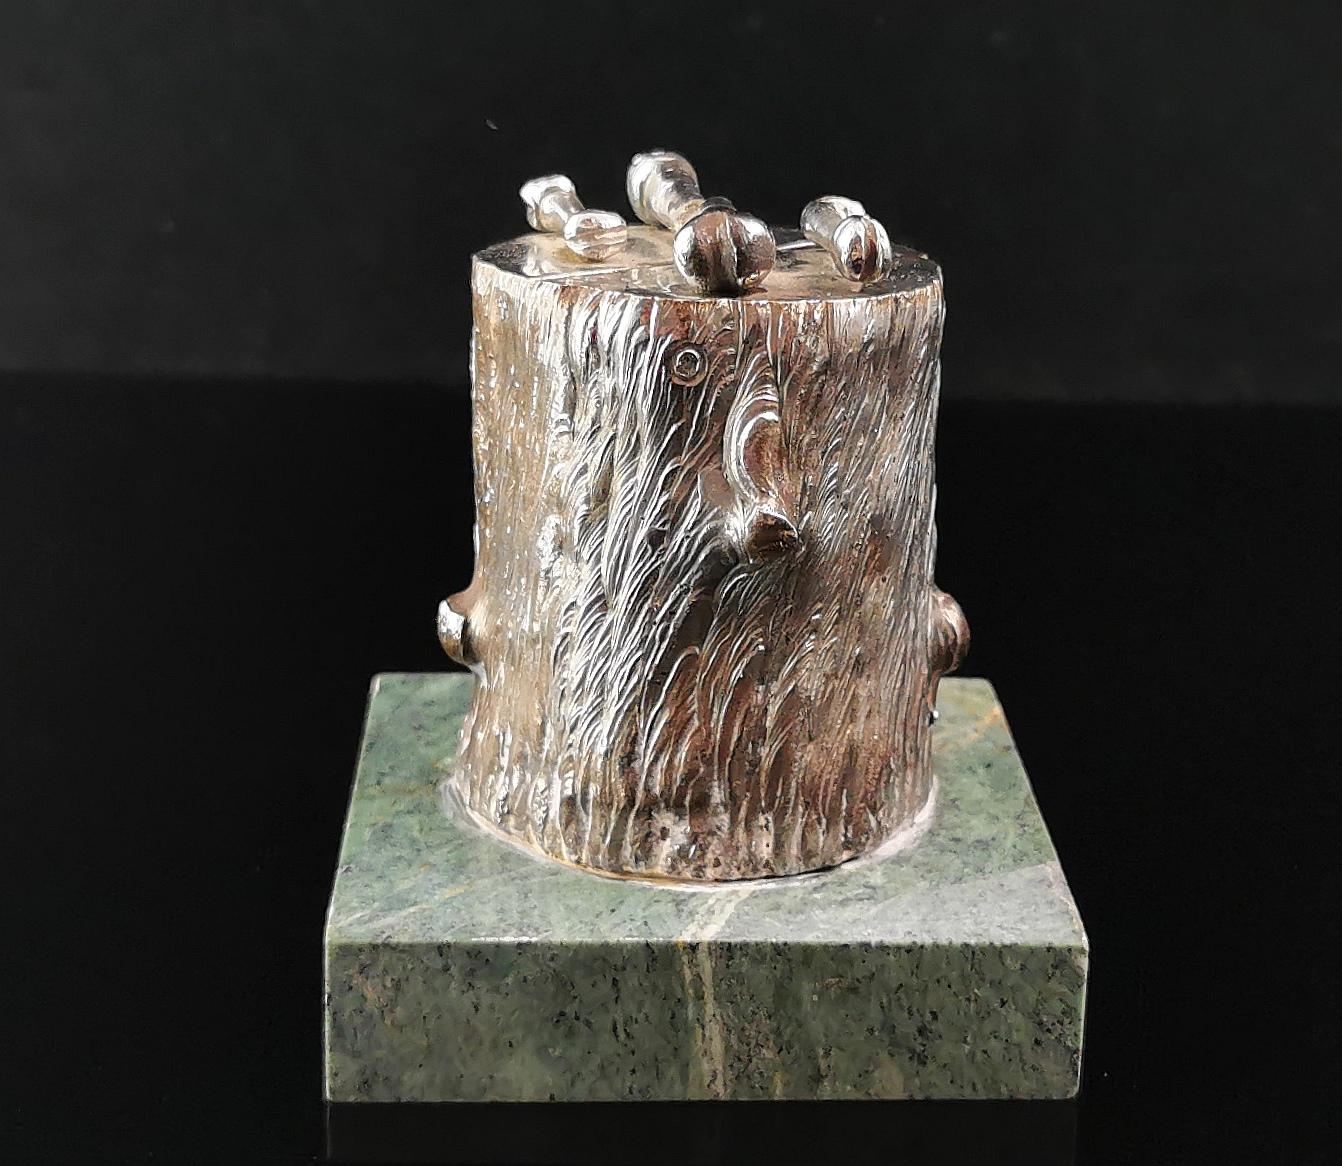 A rare antique desk model or sculpture.

It is designed as a chopping block, a large tree stump with an arrangement of bones on the top giving it a sinister feel.

It is a very heavy silver plated metal affixed to a square green marble base.

It has